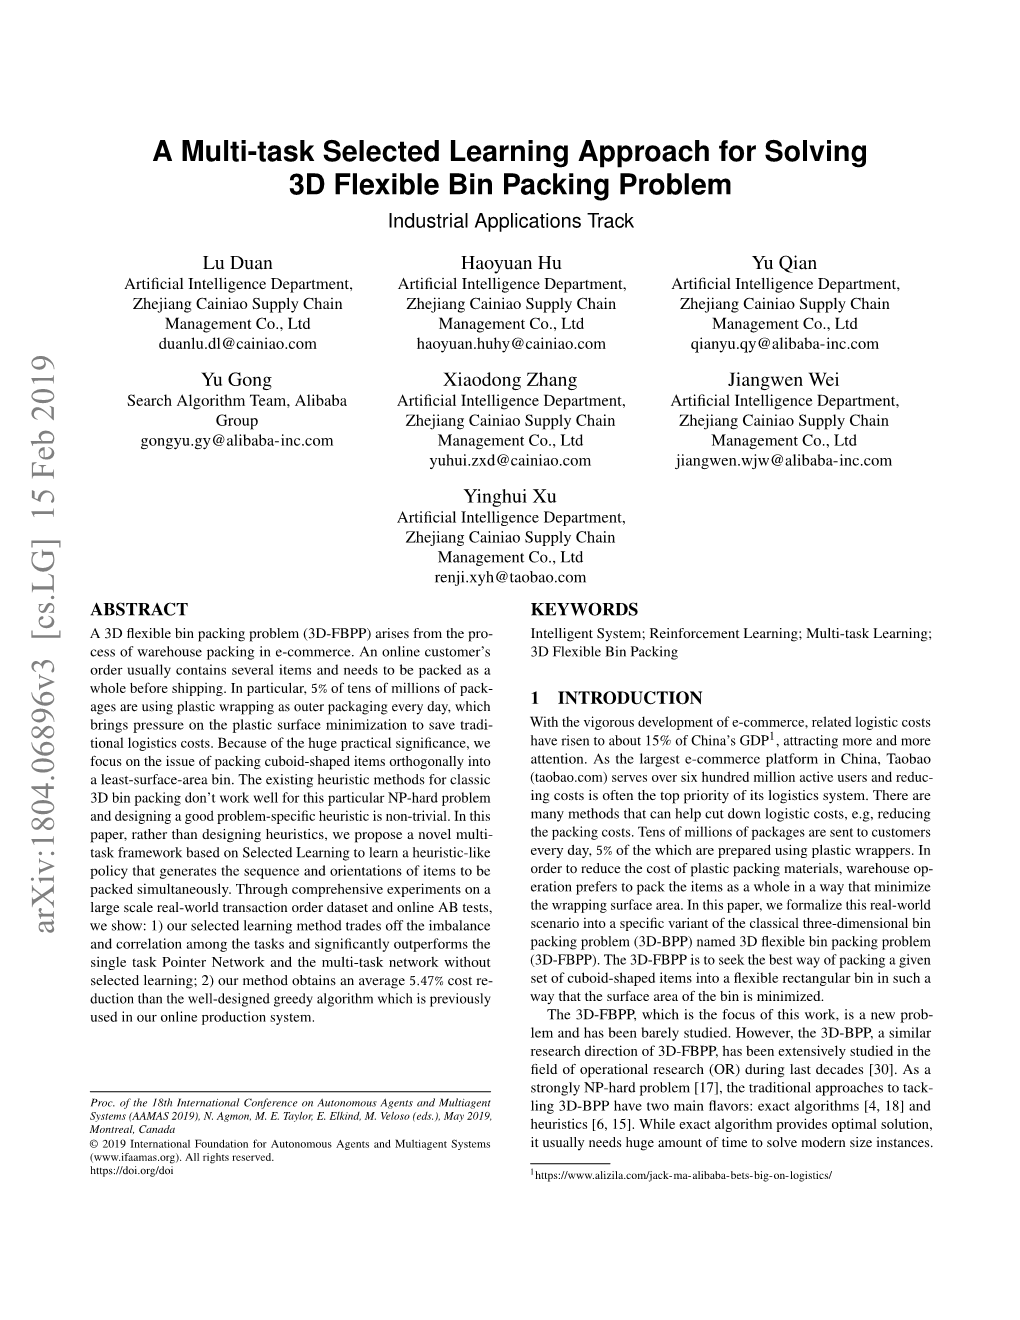 A Multi-Task Selected Learning Approach for Solving 3D Flexible Bin Packing Problem Industrial Applications Track